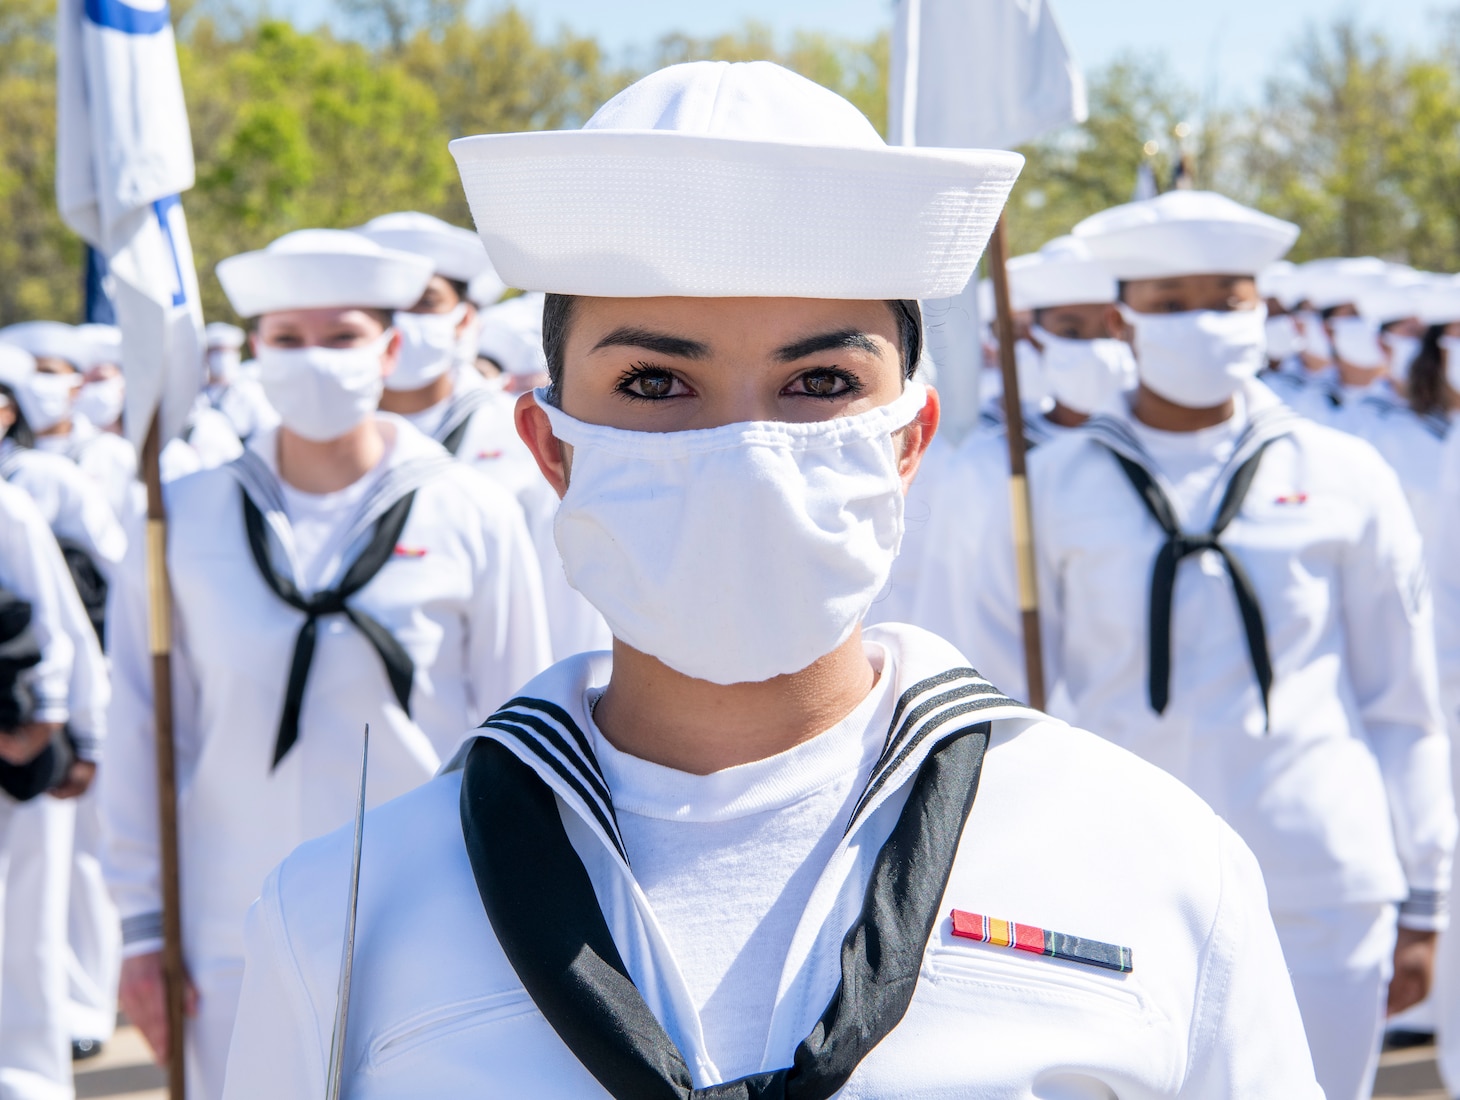 A recruit chief petty officer stands at the lead of her formation before their pass-in-review graduation ceremony at Recruit Training Command.